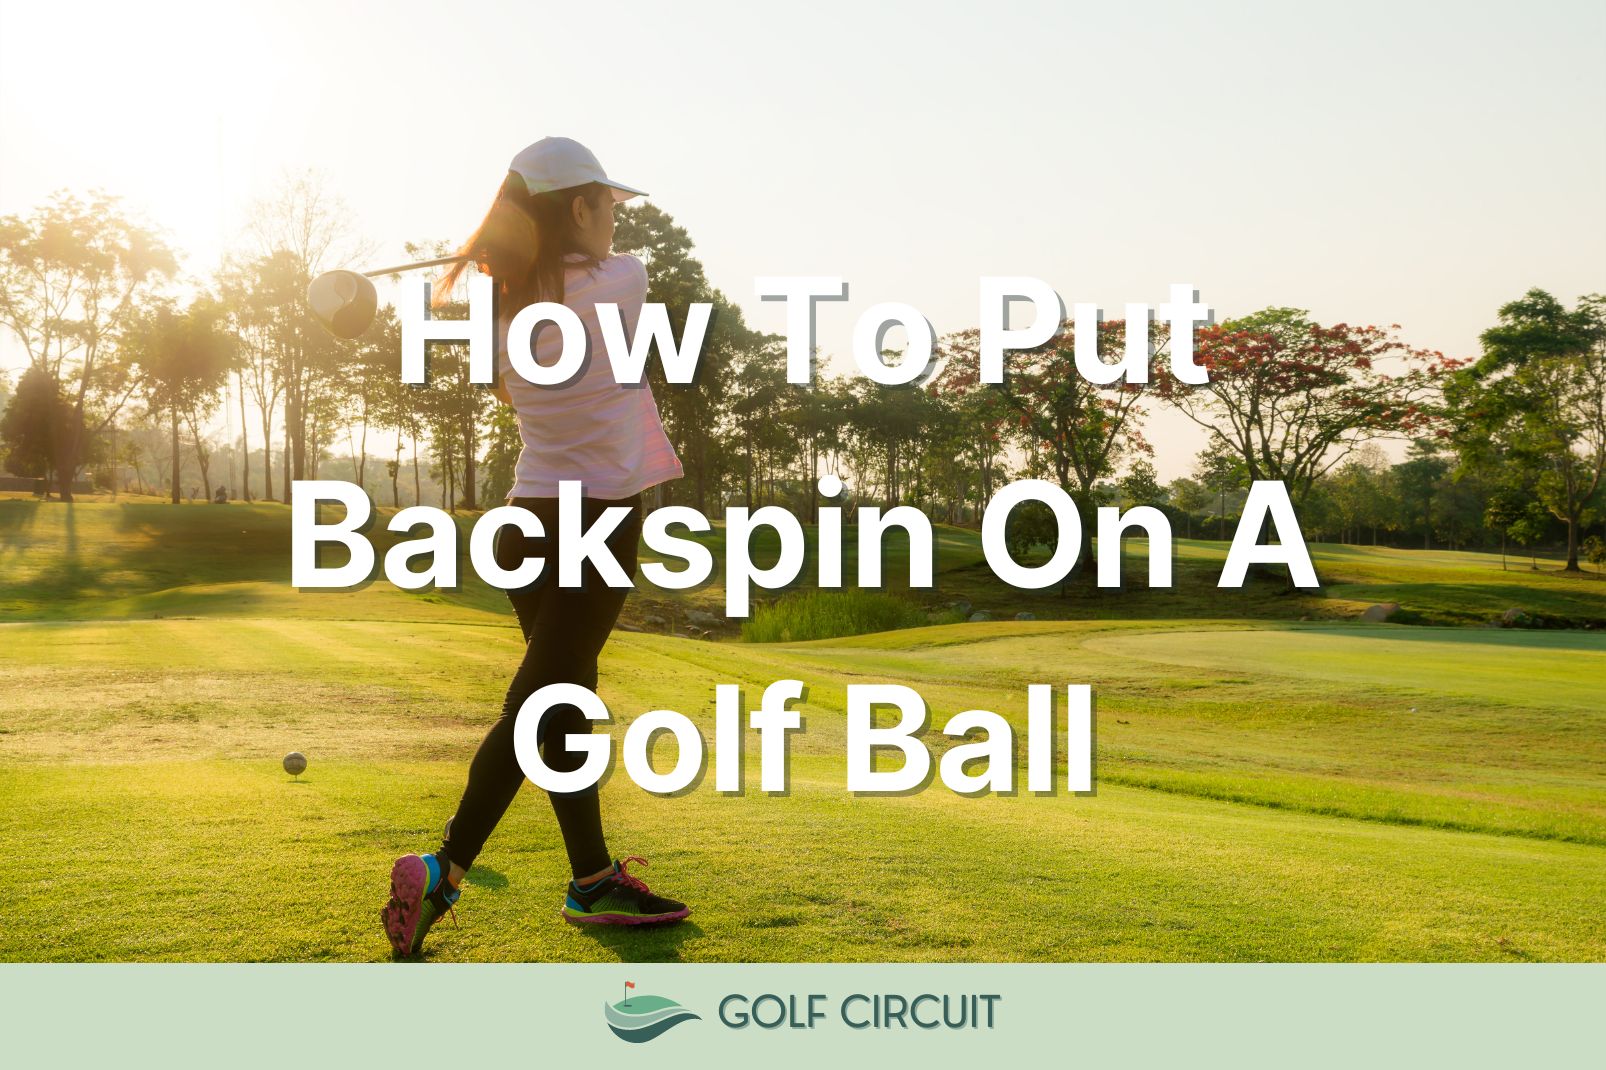 how to put backspin on a golf ball